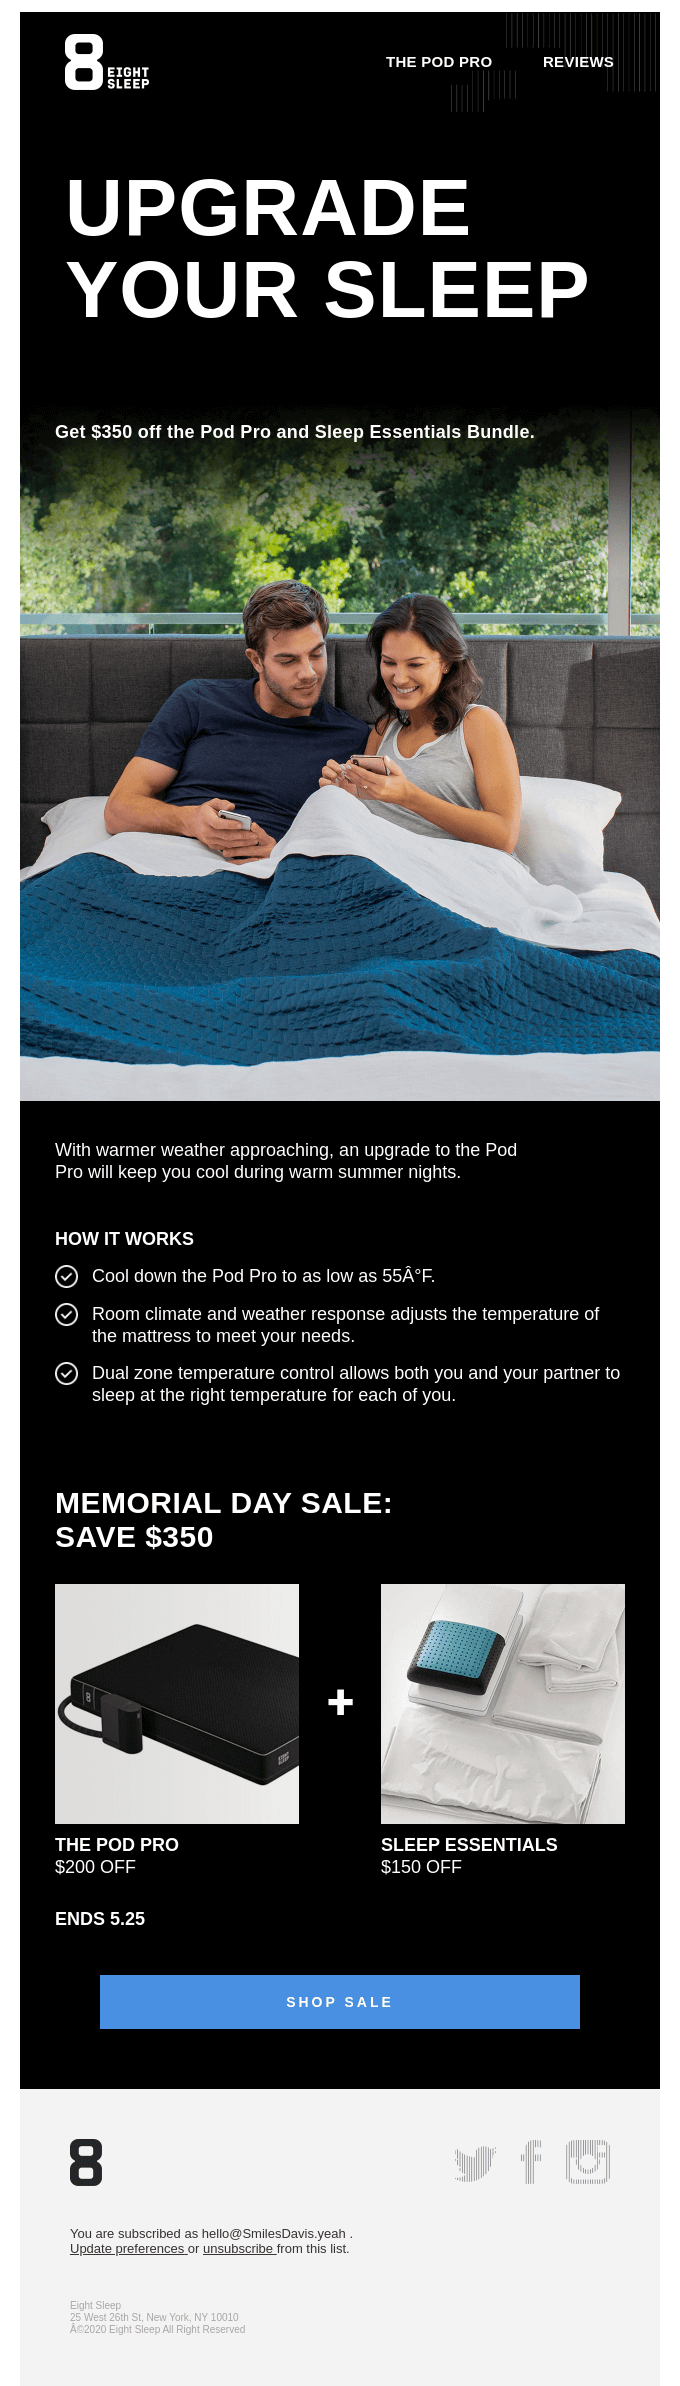 Our Memorial Day Sale ends soon